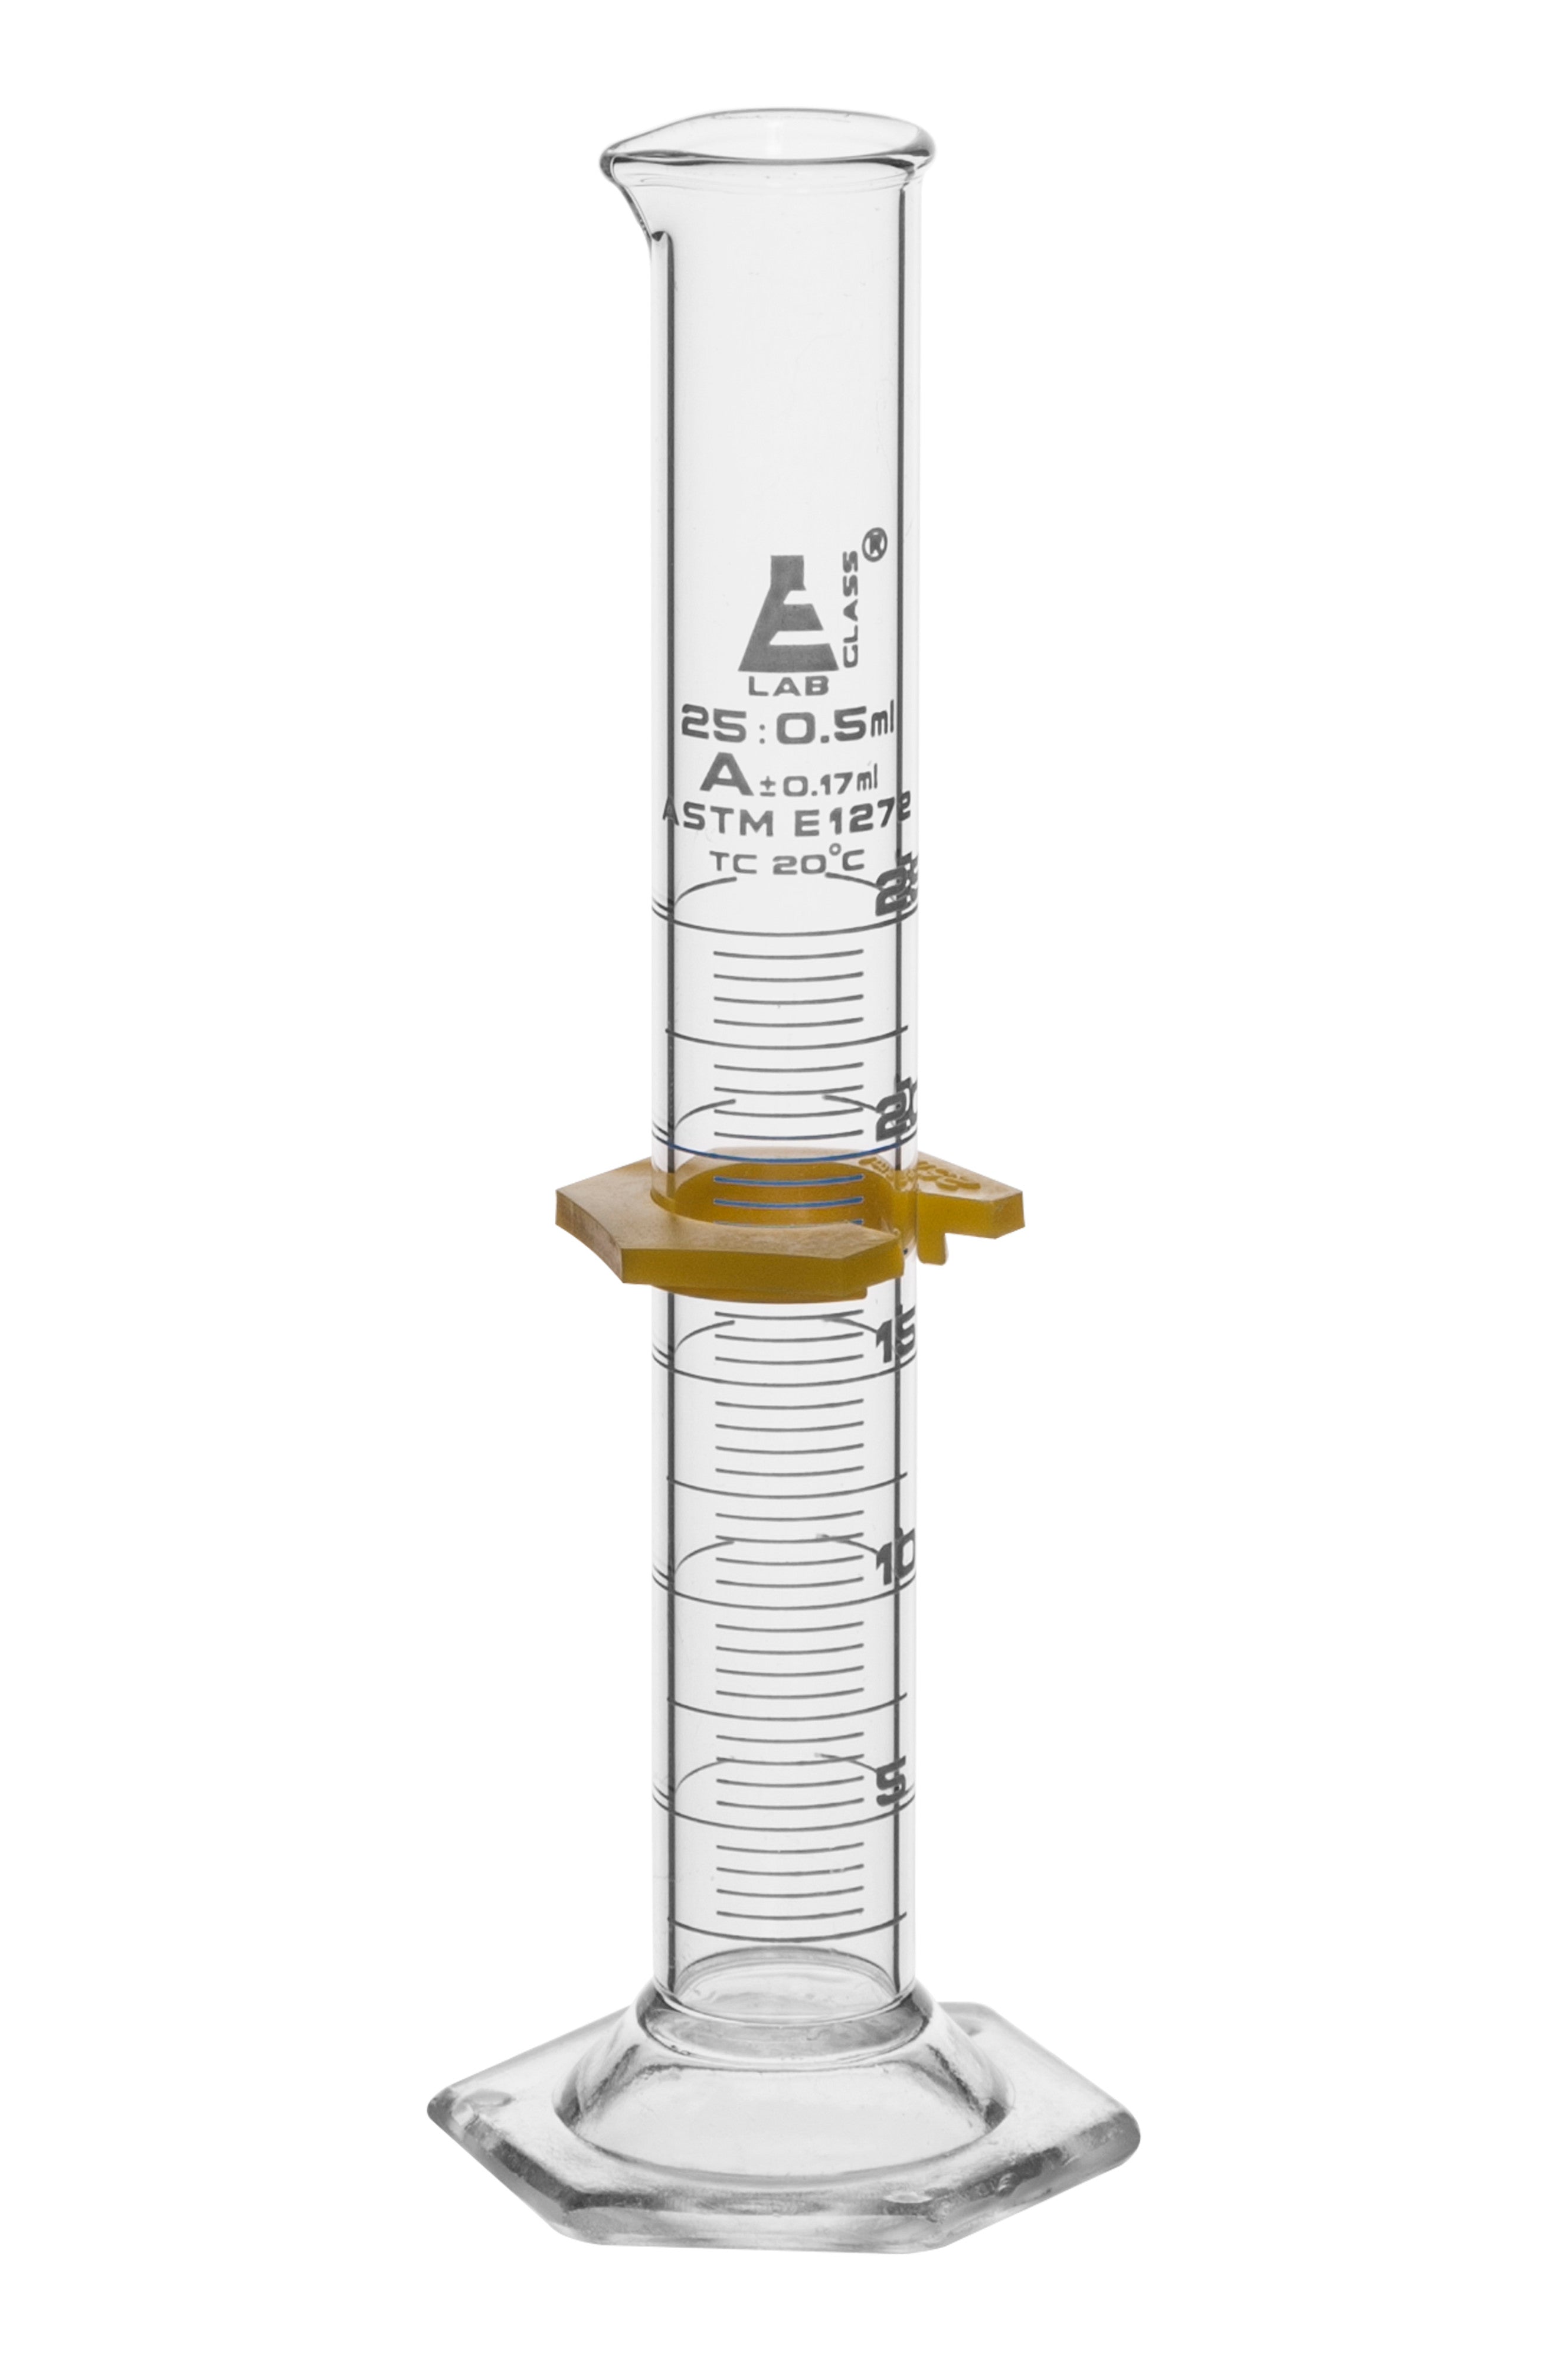 Borosilicate Glass Graduated Cylinder with Guard, 25 ml, 0.5 ml Graduation, Class A, ASTM, Autoclavable